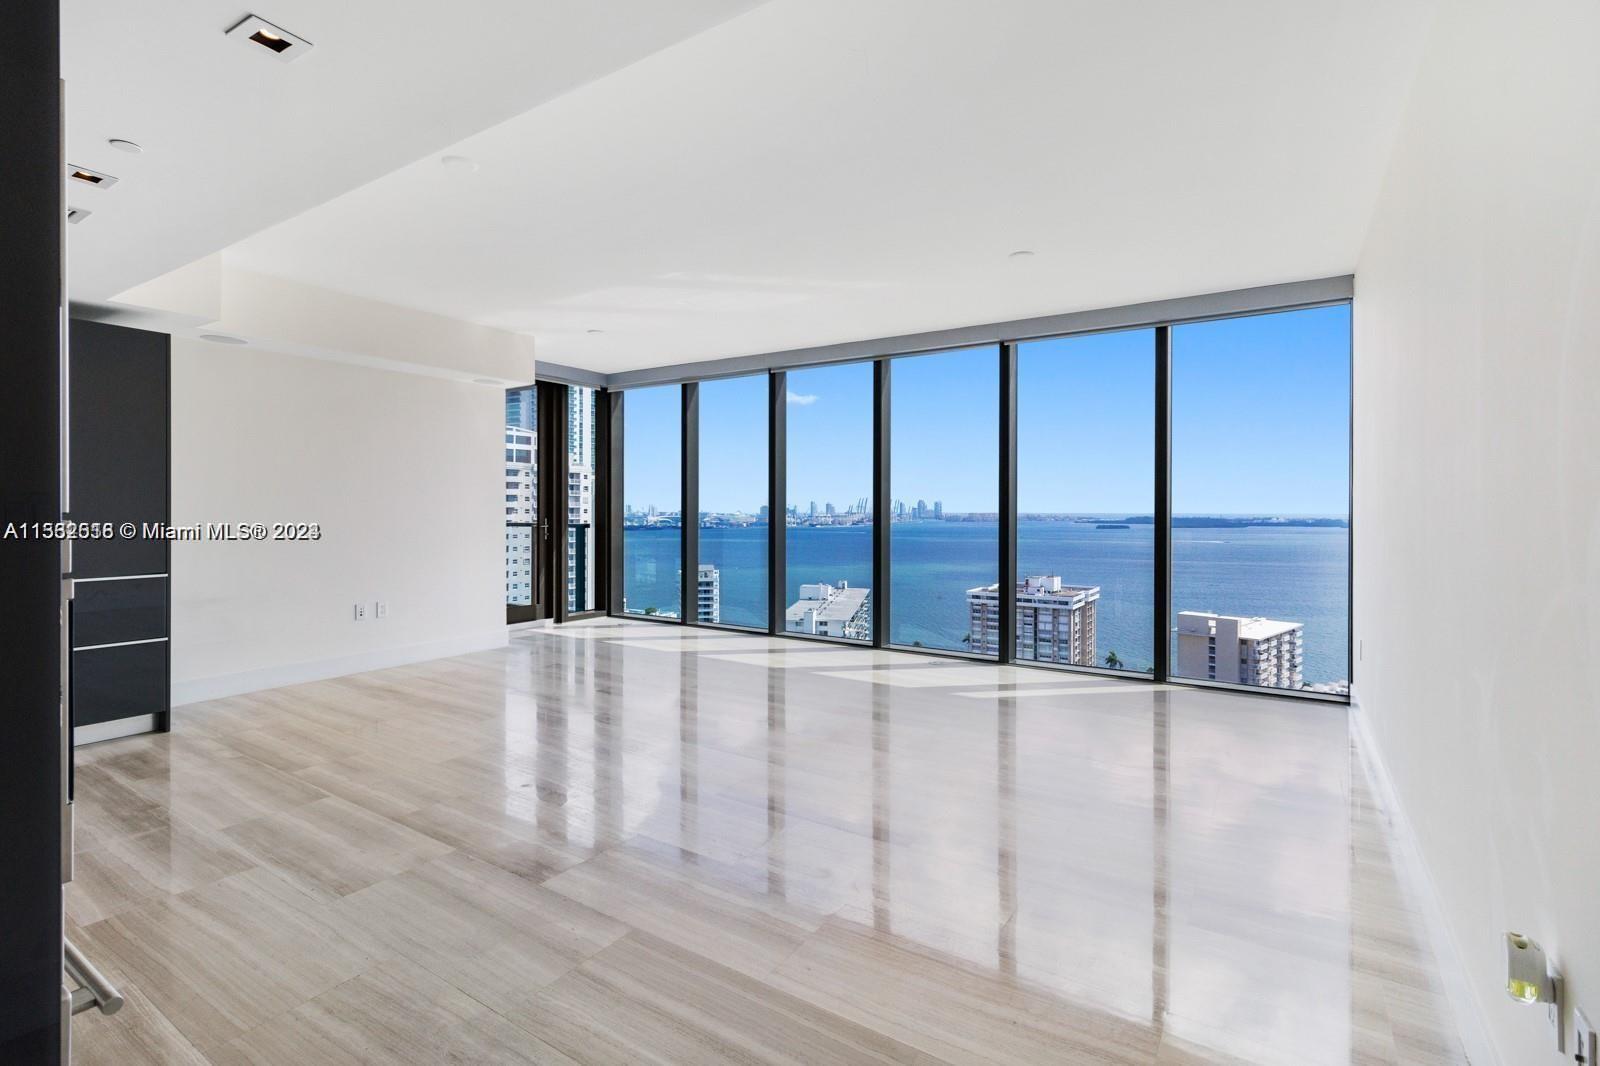 EXQUISITE 2 BEDS / 2.5 BATHS CORNER UNIT AT THE MAGNIFICENT ECHO BRICKELL. HOME SMART TECHNOLOGY. BREATHTAKING BAY AND CITY VIEWS FROM ITS WRAPARROUND BALCONIES WITH AN AMAZING SUMMER KITCHEN PERFECT FOR ENTERTAINING. FLOOR TO-CEILING IMPACT WINDOWS. TOP-OF-THE-LINE WOLF / SUB-ZERO APPLIANCES, INCLUDING A BUILT-IN ESPRESSO MACHINE 2 PARKING SPACES. ECHO IS ONE OF THE MOST EXCLUSIVE AND PRESTIGIOUS BUILDINGS IN BRICKELL. AMENITIES INCLUDE INFINITY POOL AND DECK SERVING FOOD AND DRINKS, A FULLY EQUIPPED GYM, SPA, 24/7 CONCIERGE, VALET, AND SECURITY. IN HOUSE CHAUFFEUR SERVICES AND ON-CALL DOG WALKERS. PERFECT LOCATION, WITHIN WALKING DISTANCE TO THE BEST RESTAURANTS, COFFEE SHOPS, SUPERMARKET, PHARMACY, THE GLAMOROUS BRICKELL CITY CENTRE AND MUCH MORE.